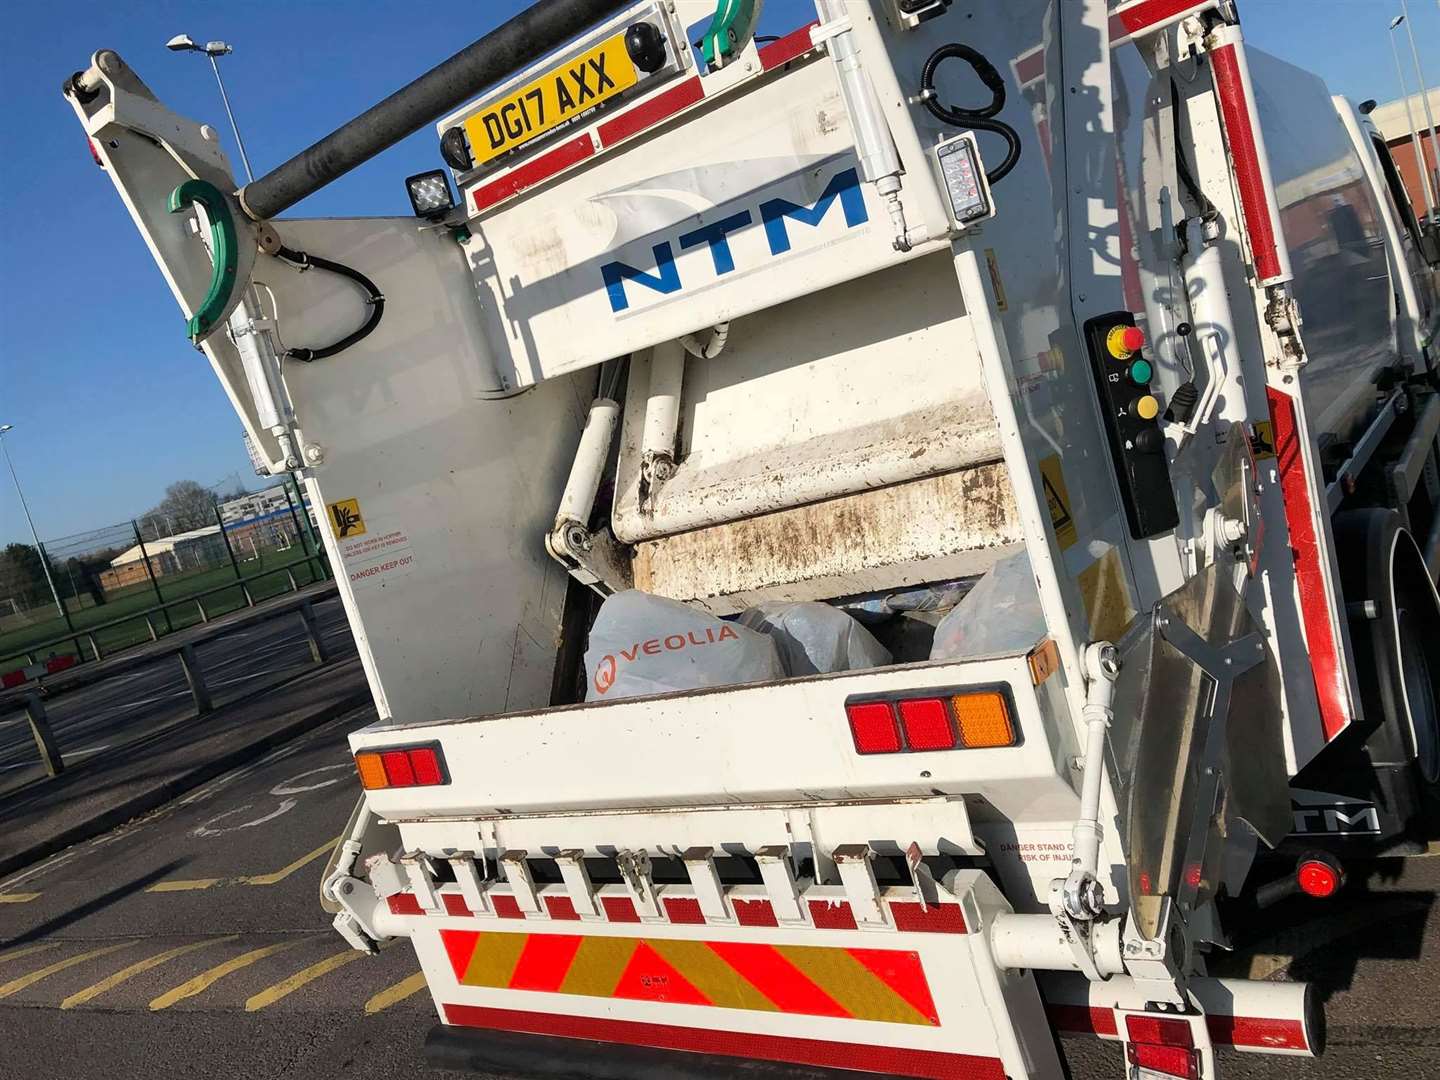 Bin workers in Thanet have backed down over threats to strike after a “bumper” new pay deal was agreed